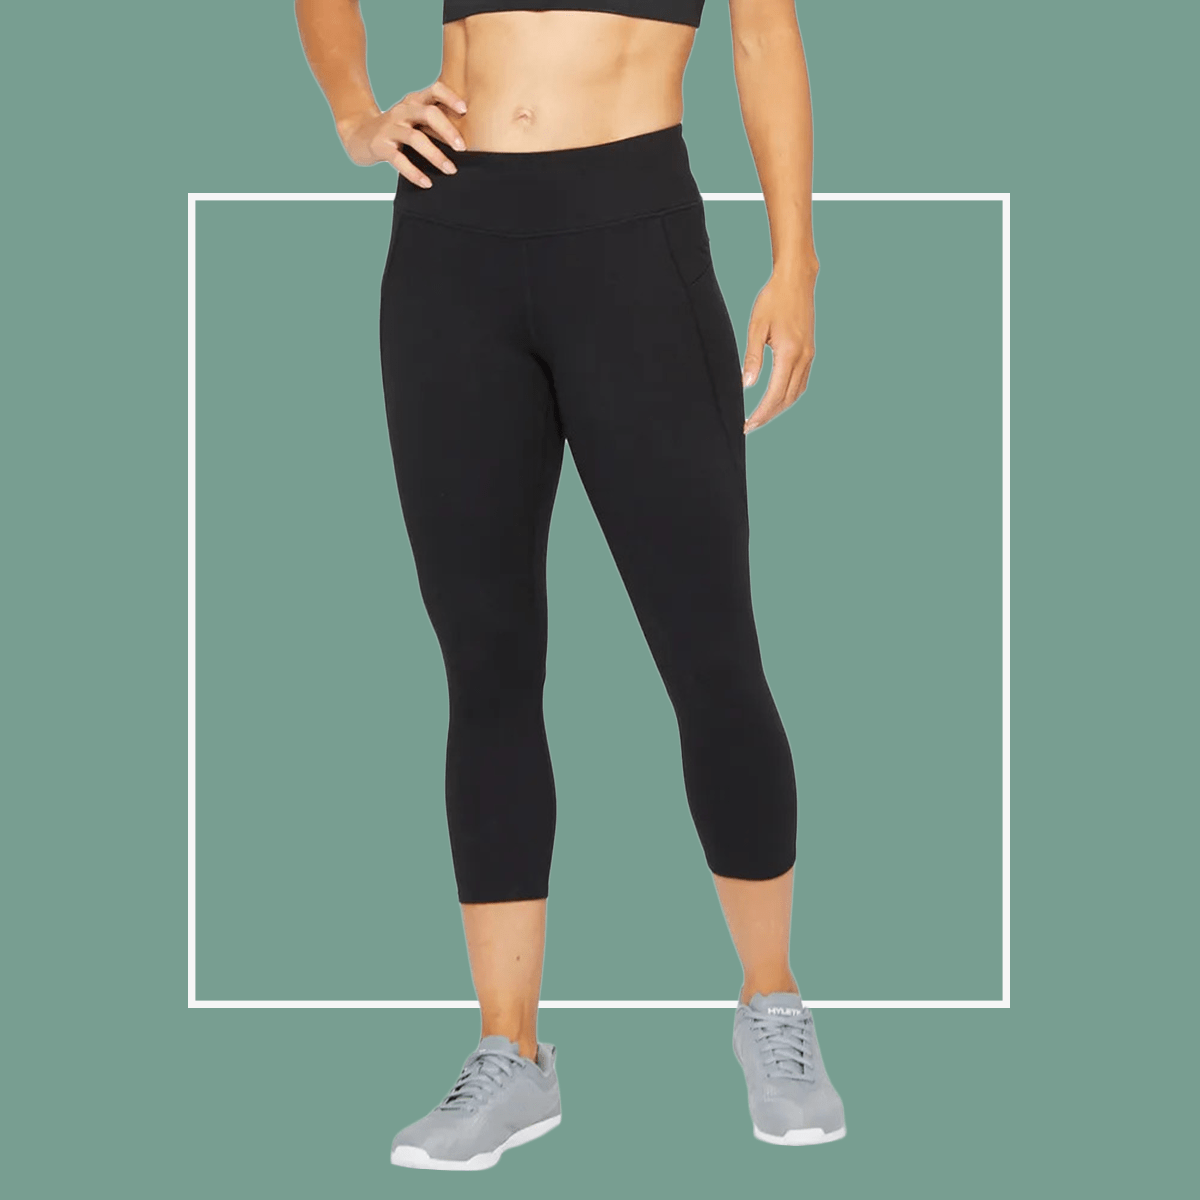 13 Best Leggings for Working Out in Warm Weather 2022 | The Healthy